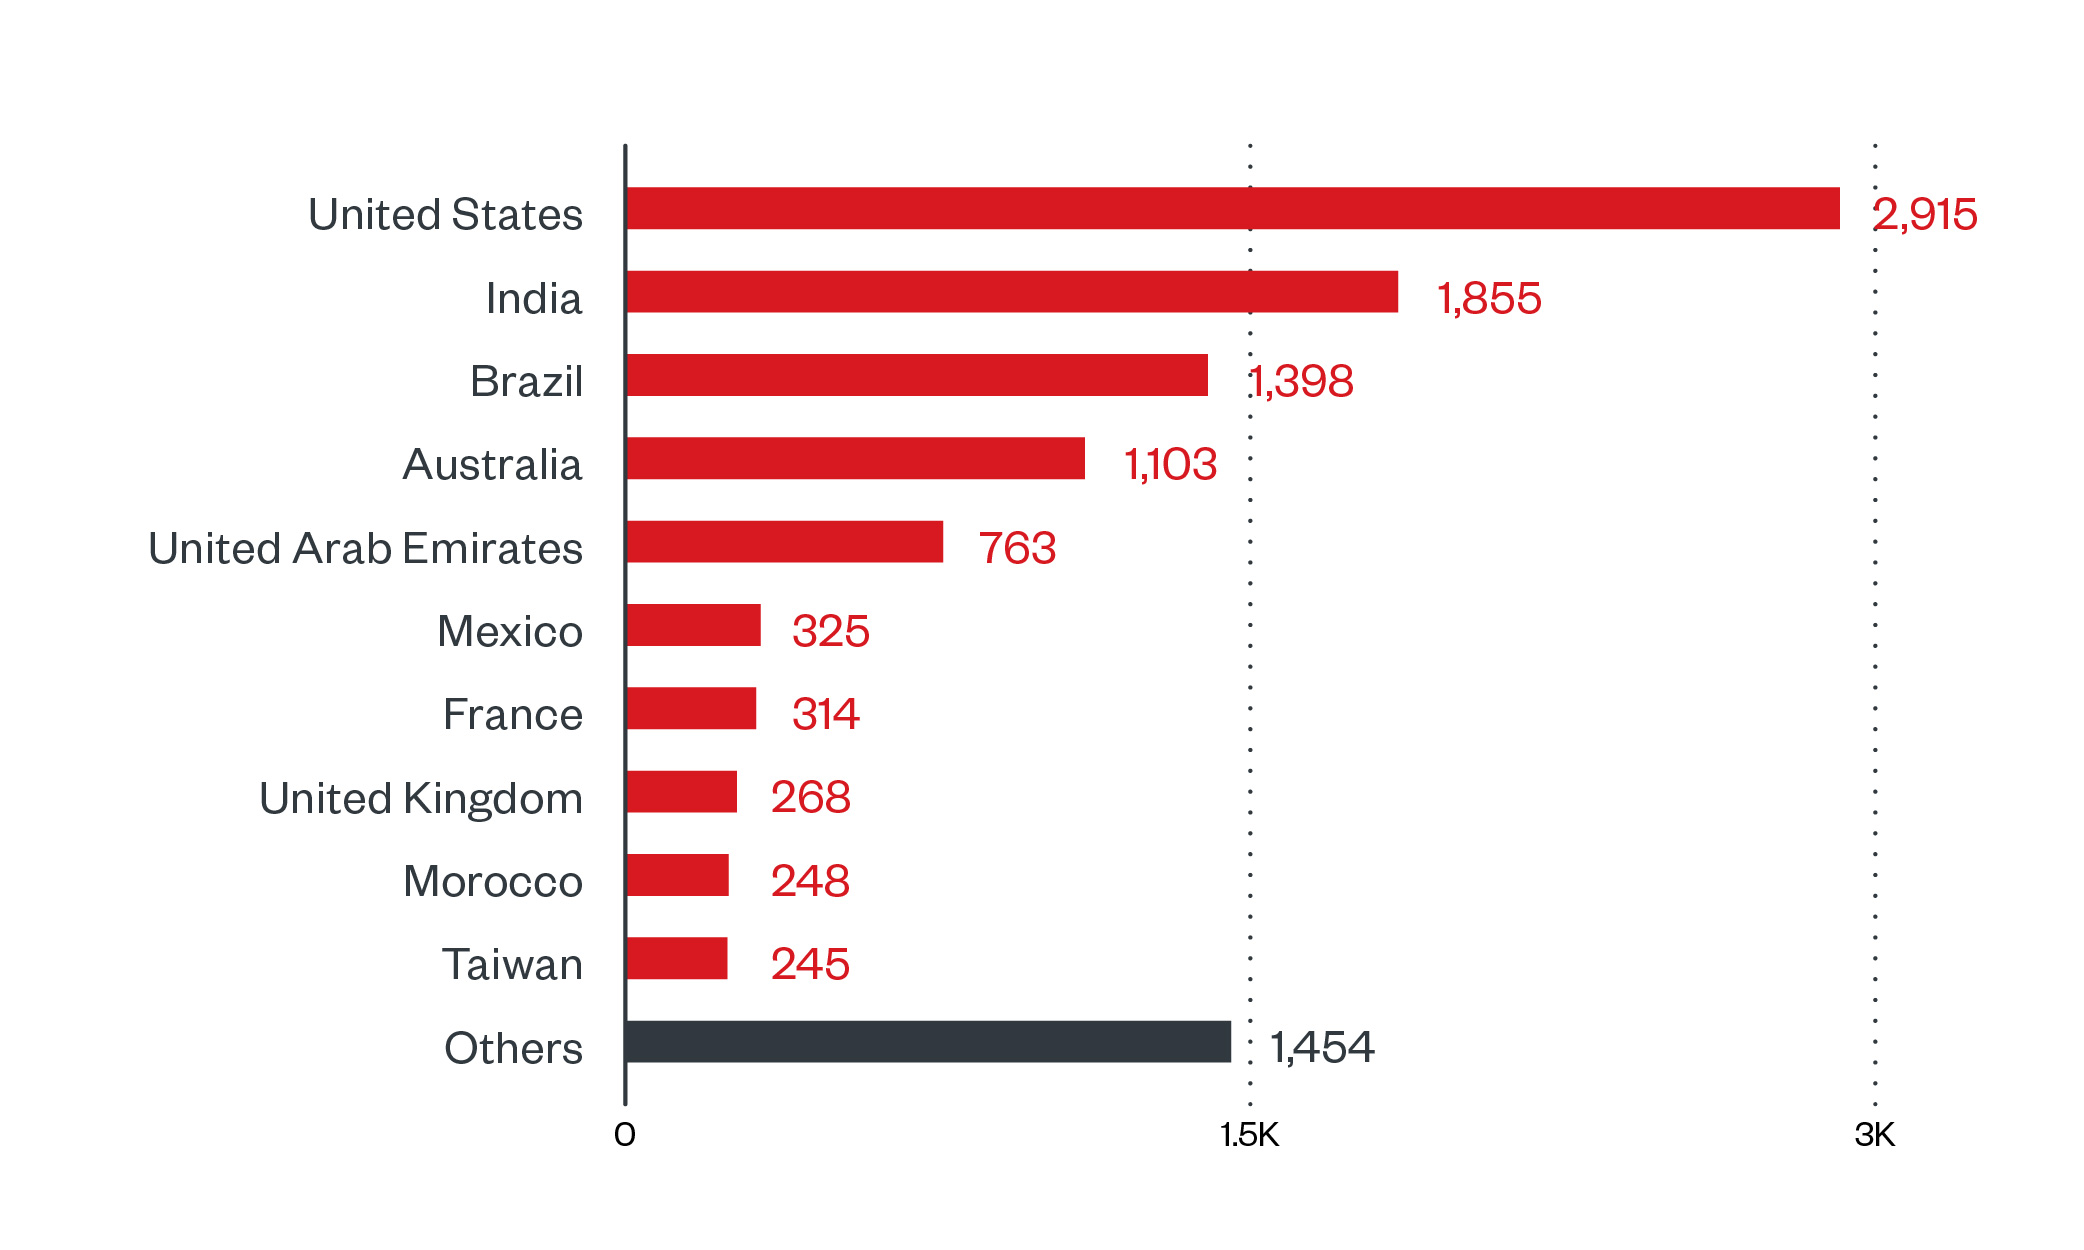 Countries with the highest number of attack attempts machine for LockBit ransomware (July 1, 2021 to January 20, 2022)